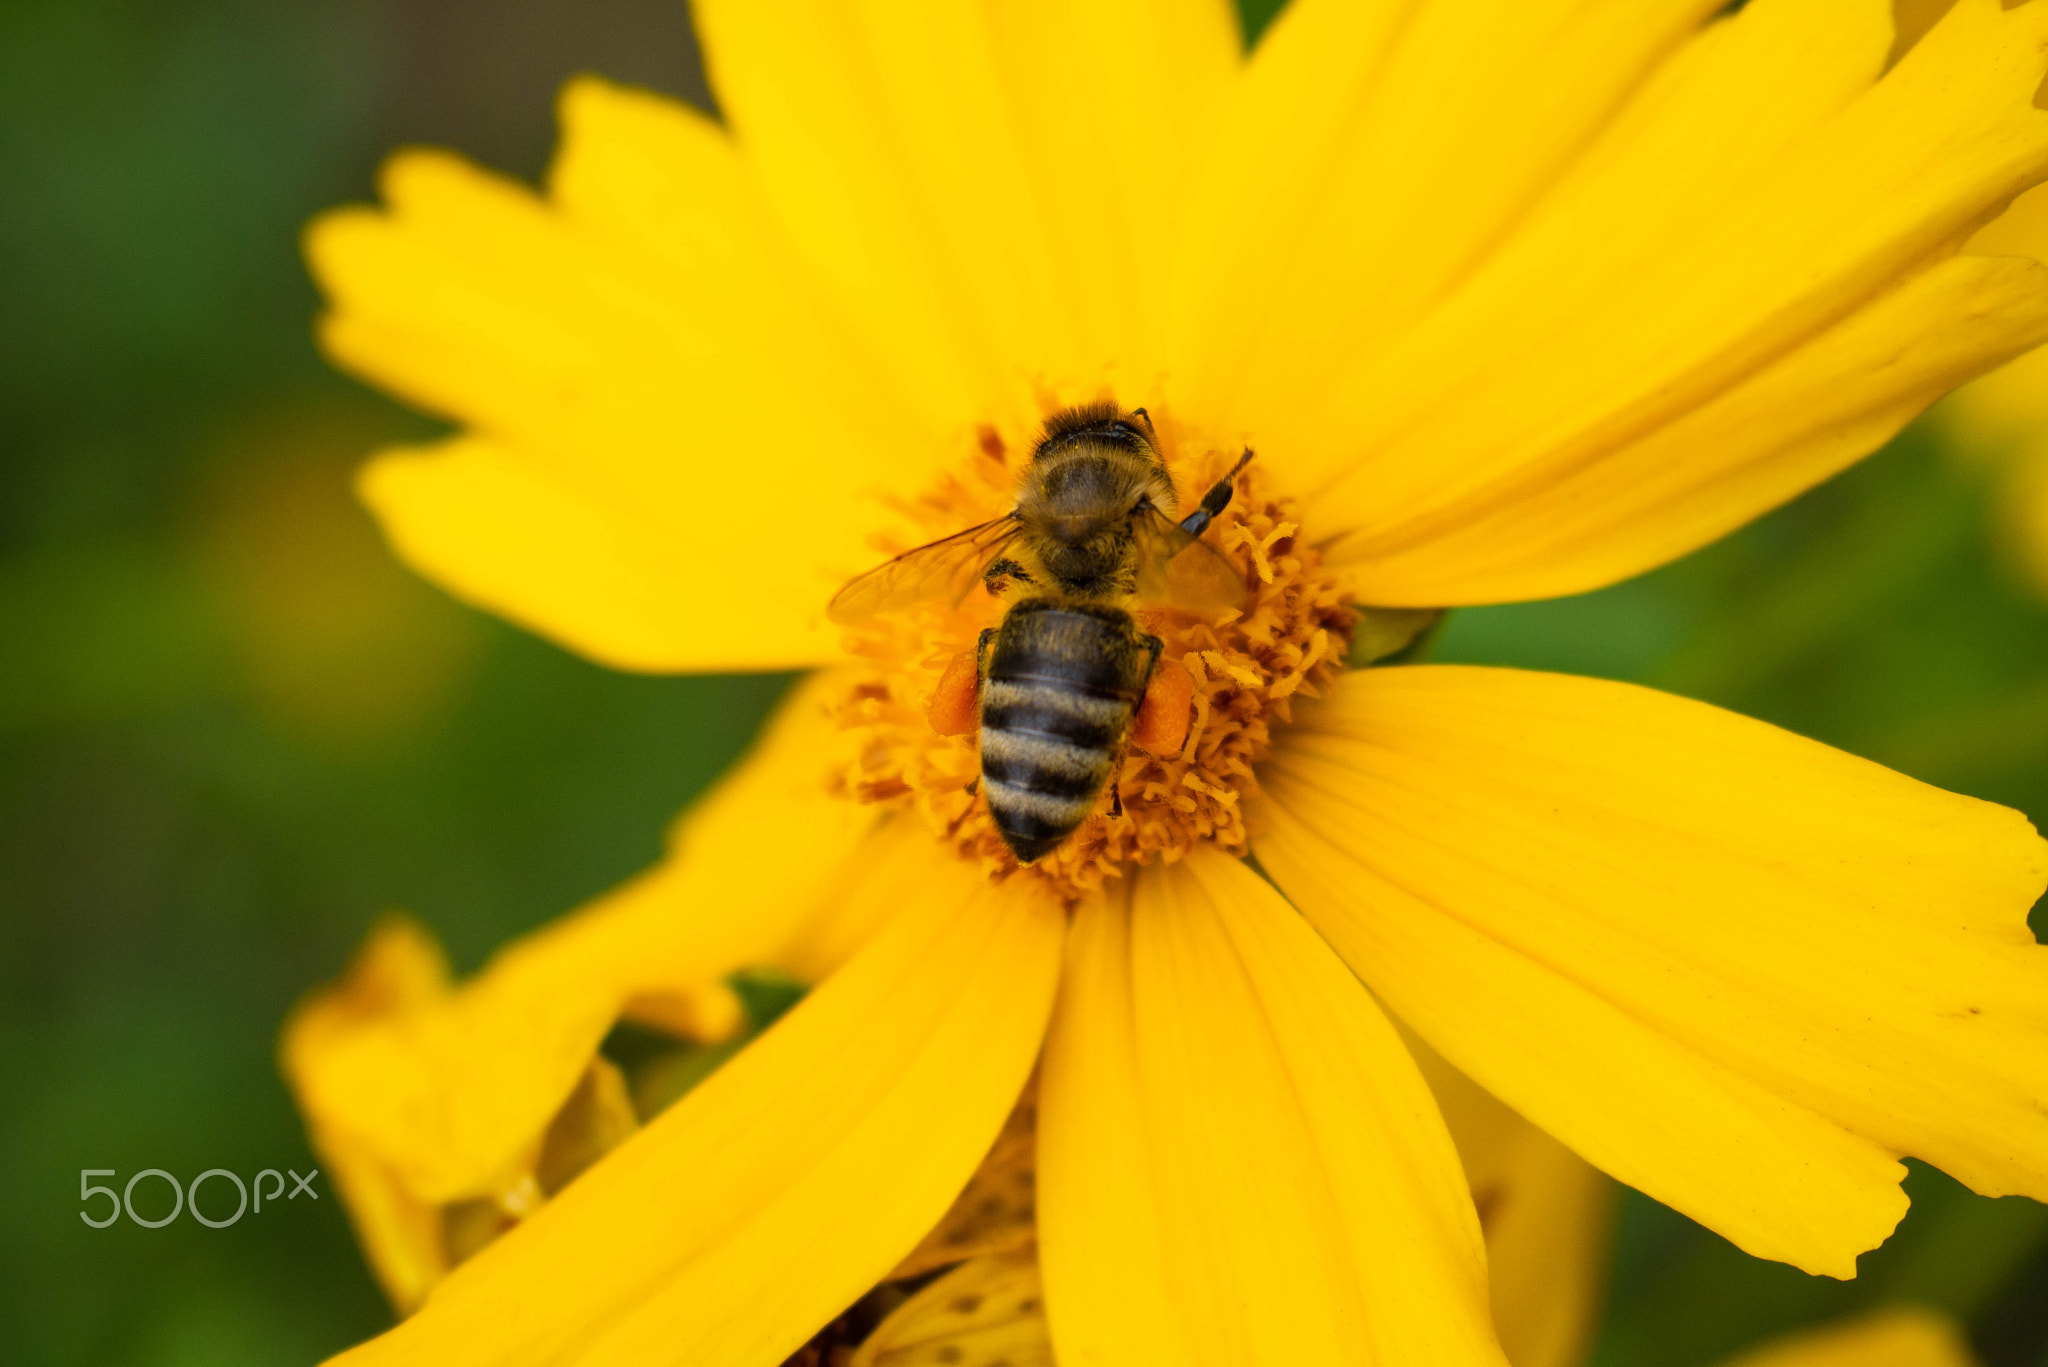 the bee collects nectar in the center of big yellow flower. Blurred